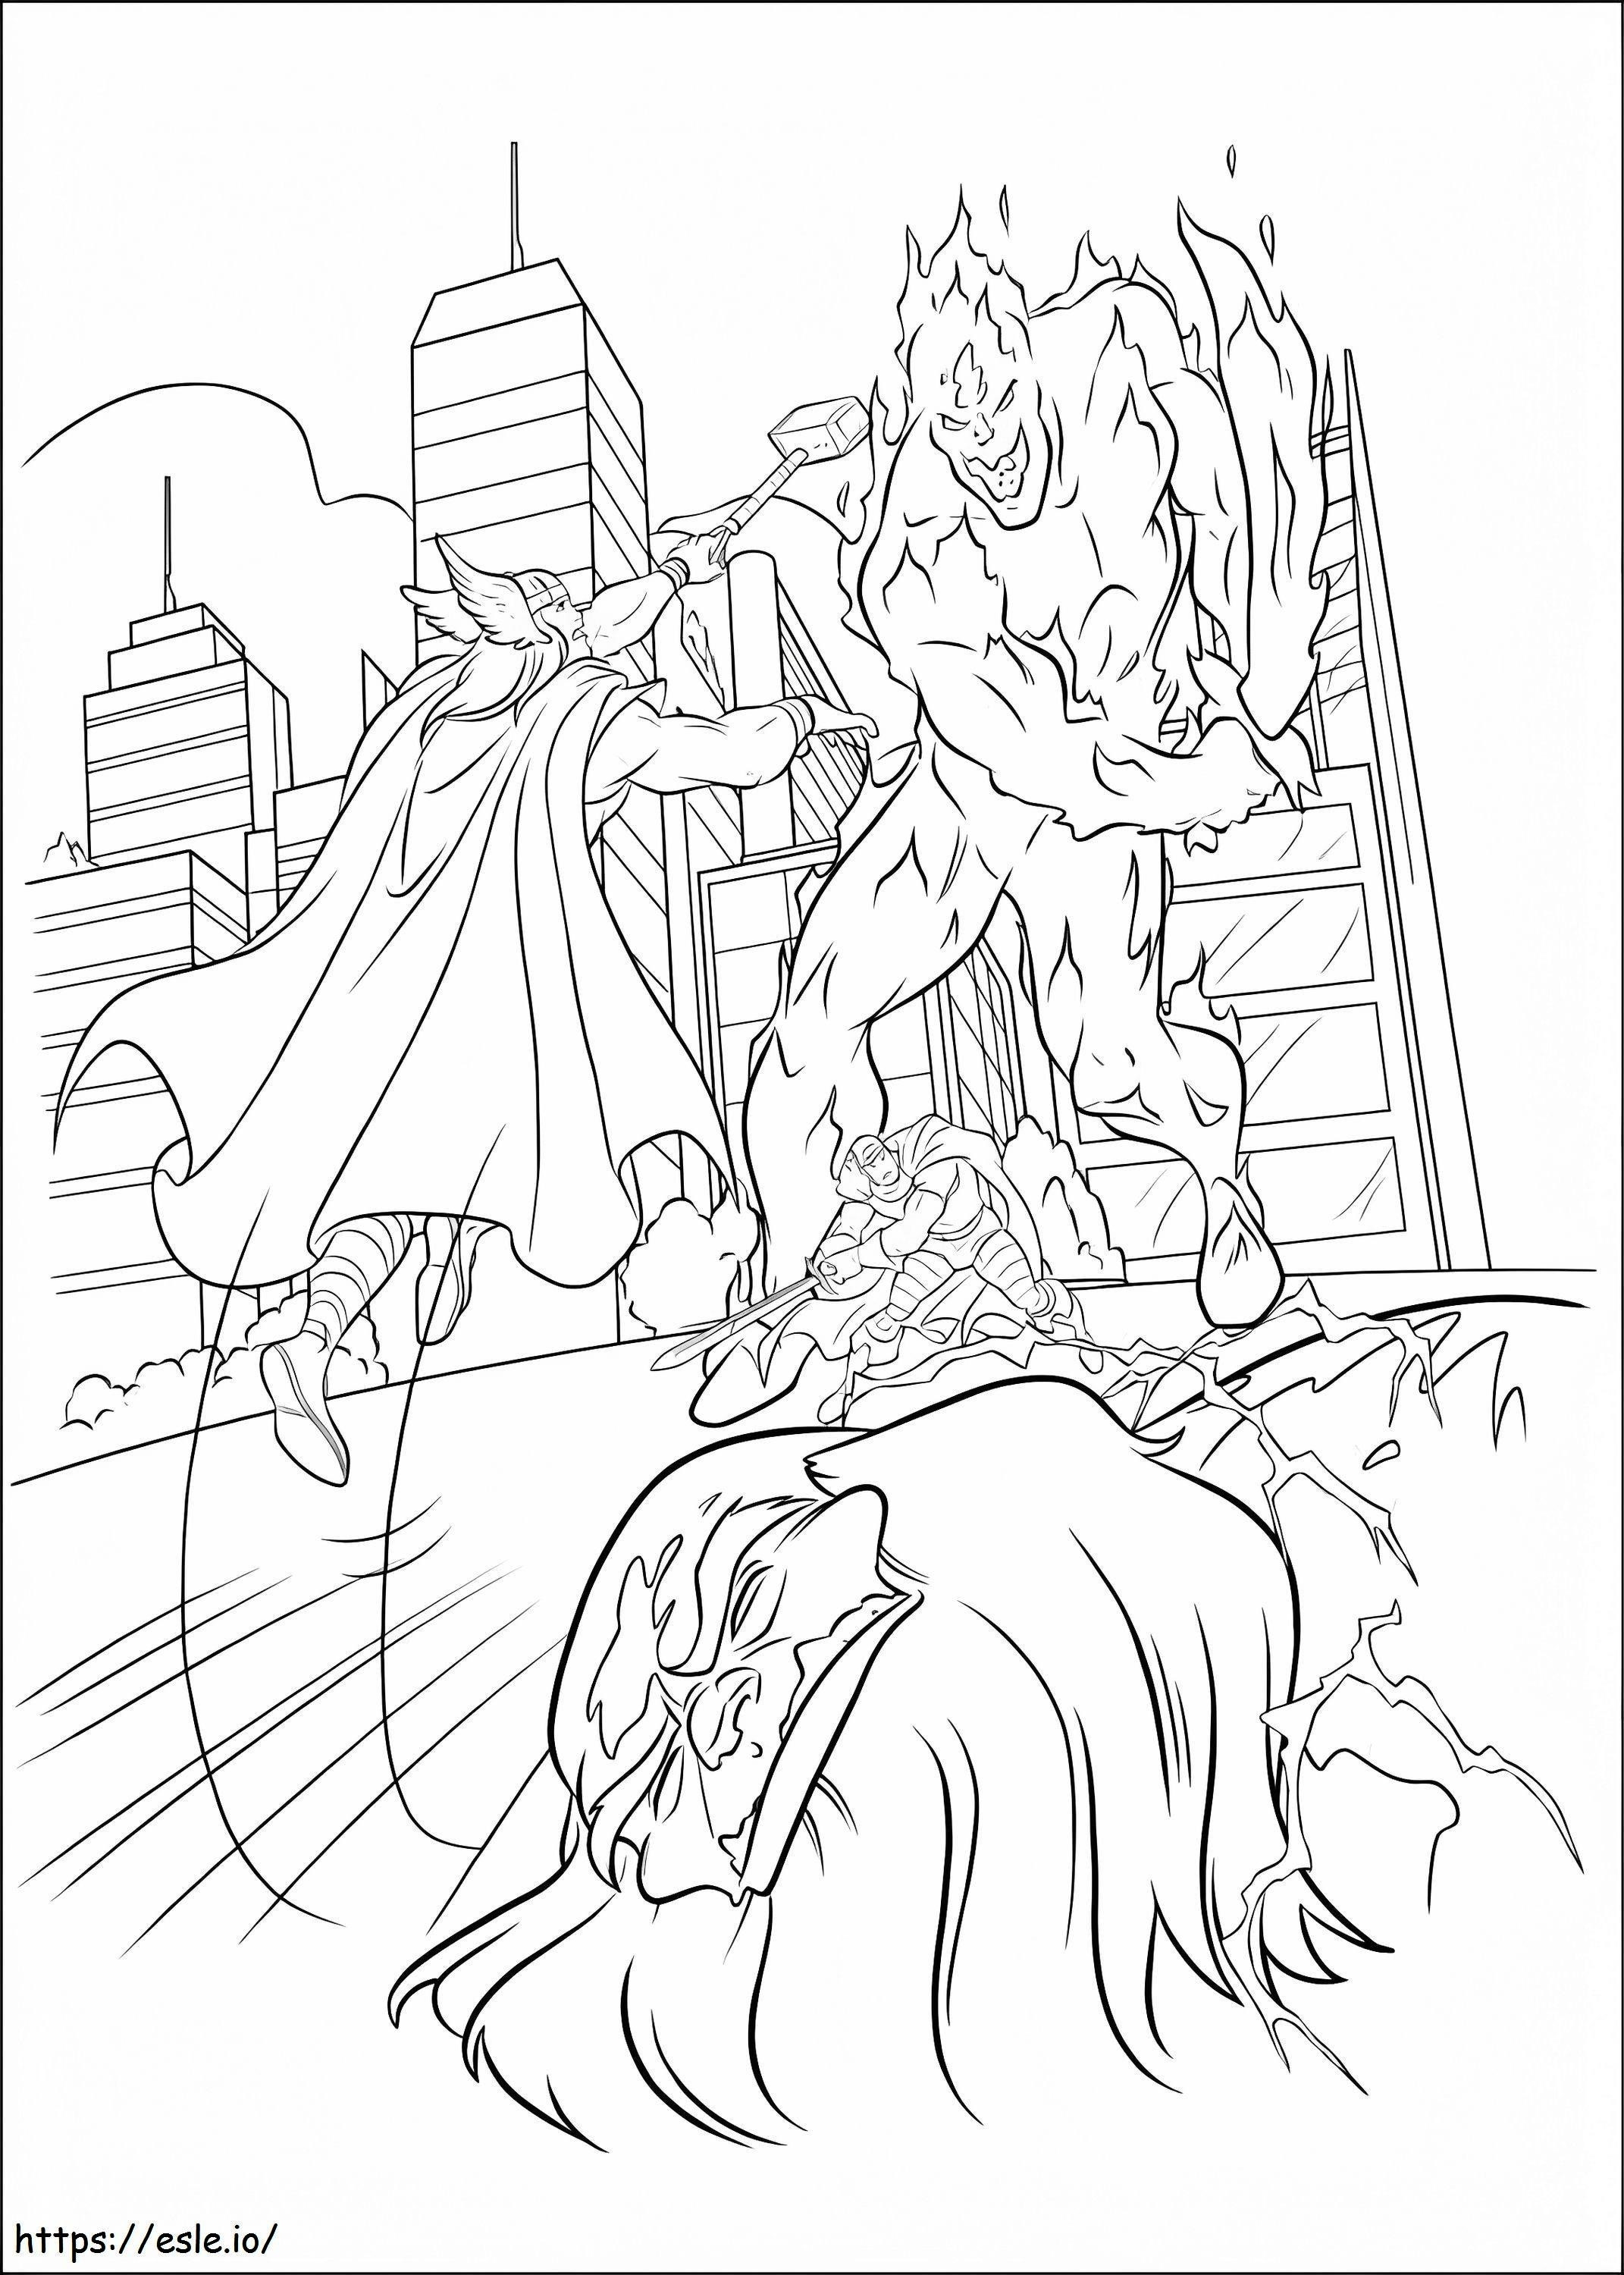 Thor Fights Monster coloring page